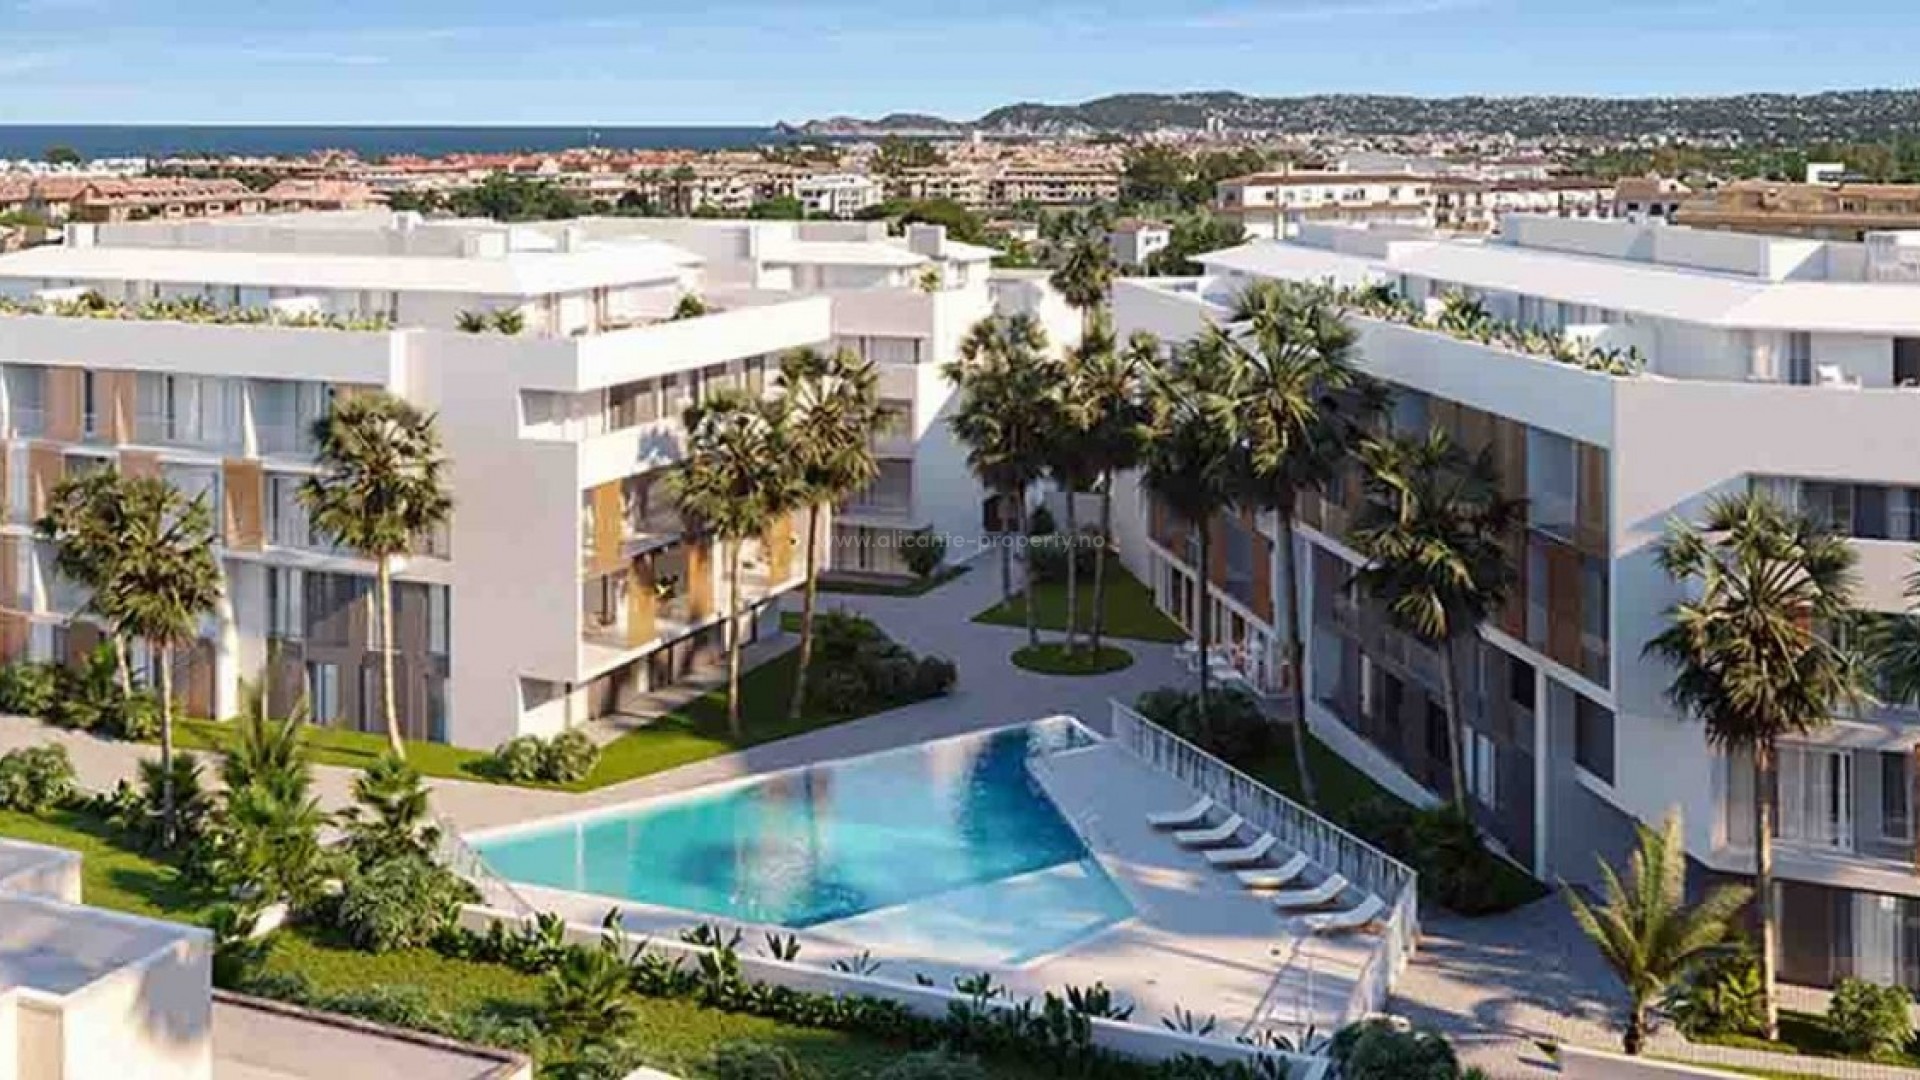 Houses/apartments in Javea, 5 minutes from the beach, the port, the center, 2/3/4 bedrooms, different types with terrace and garden. Shared pool and social club